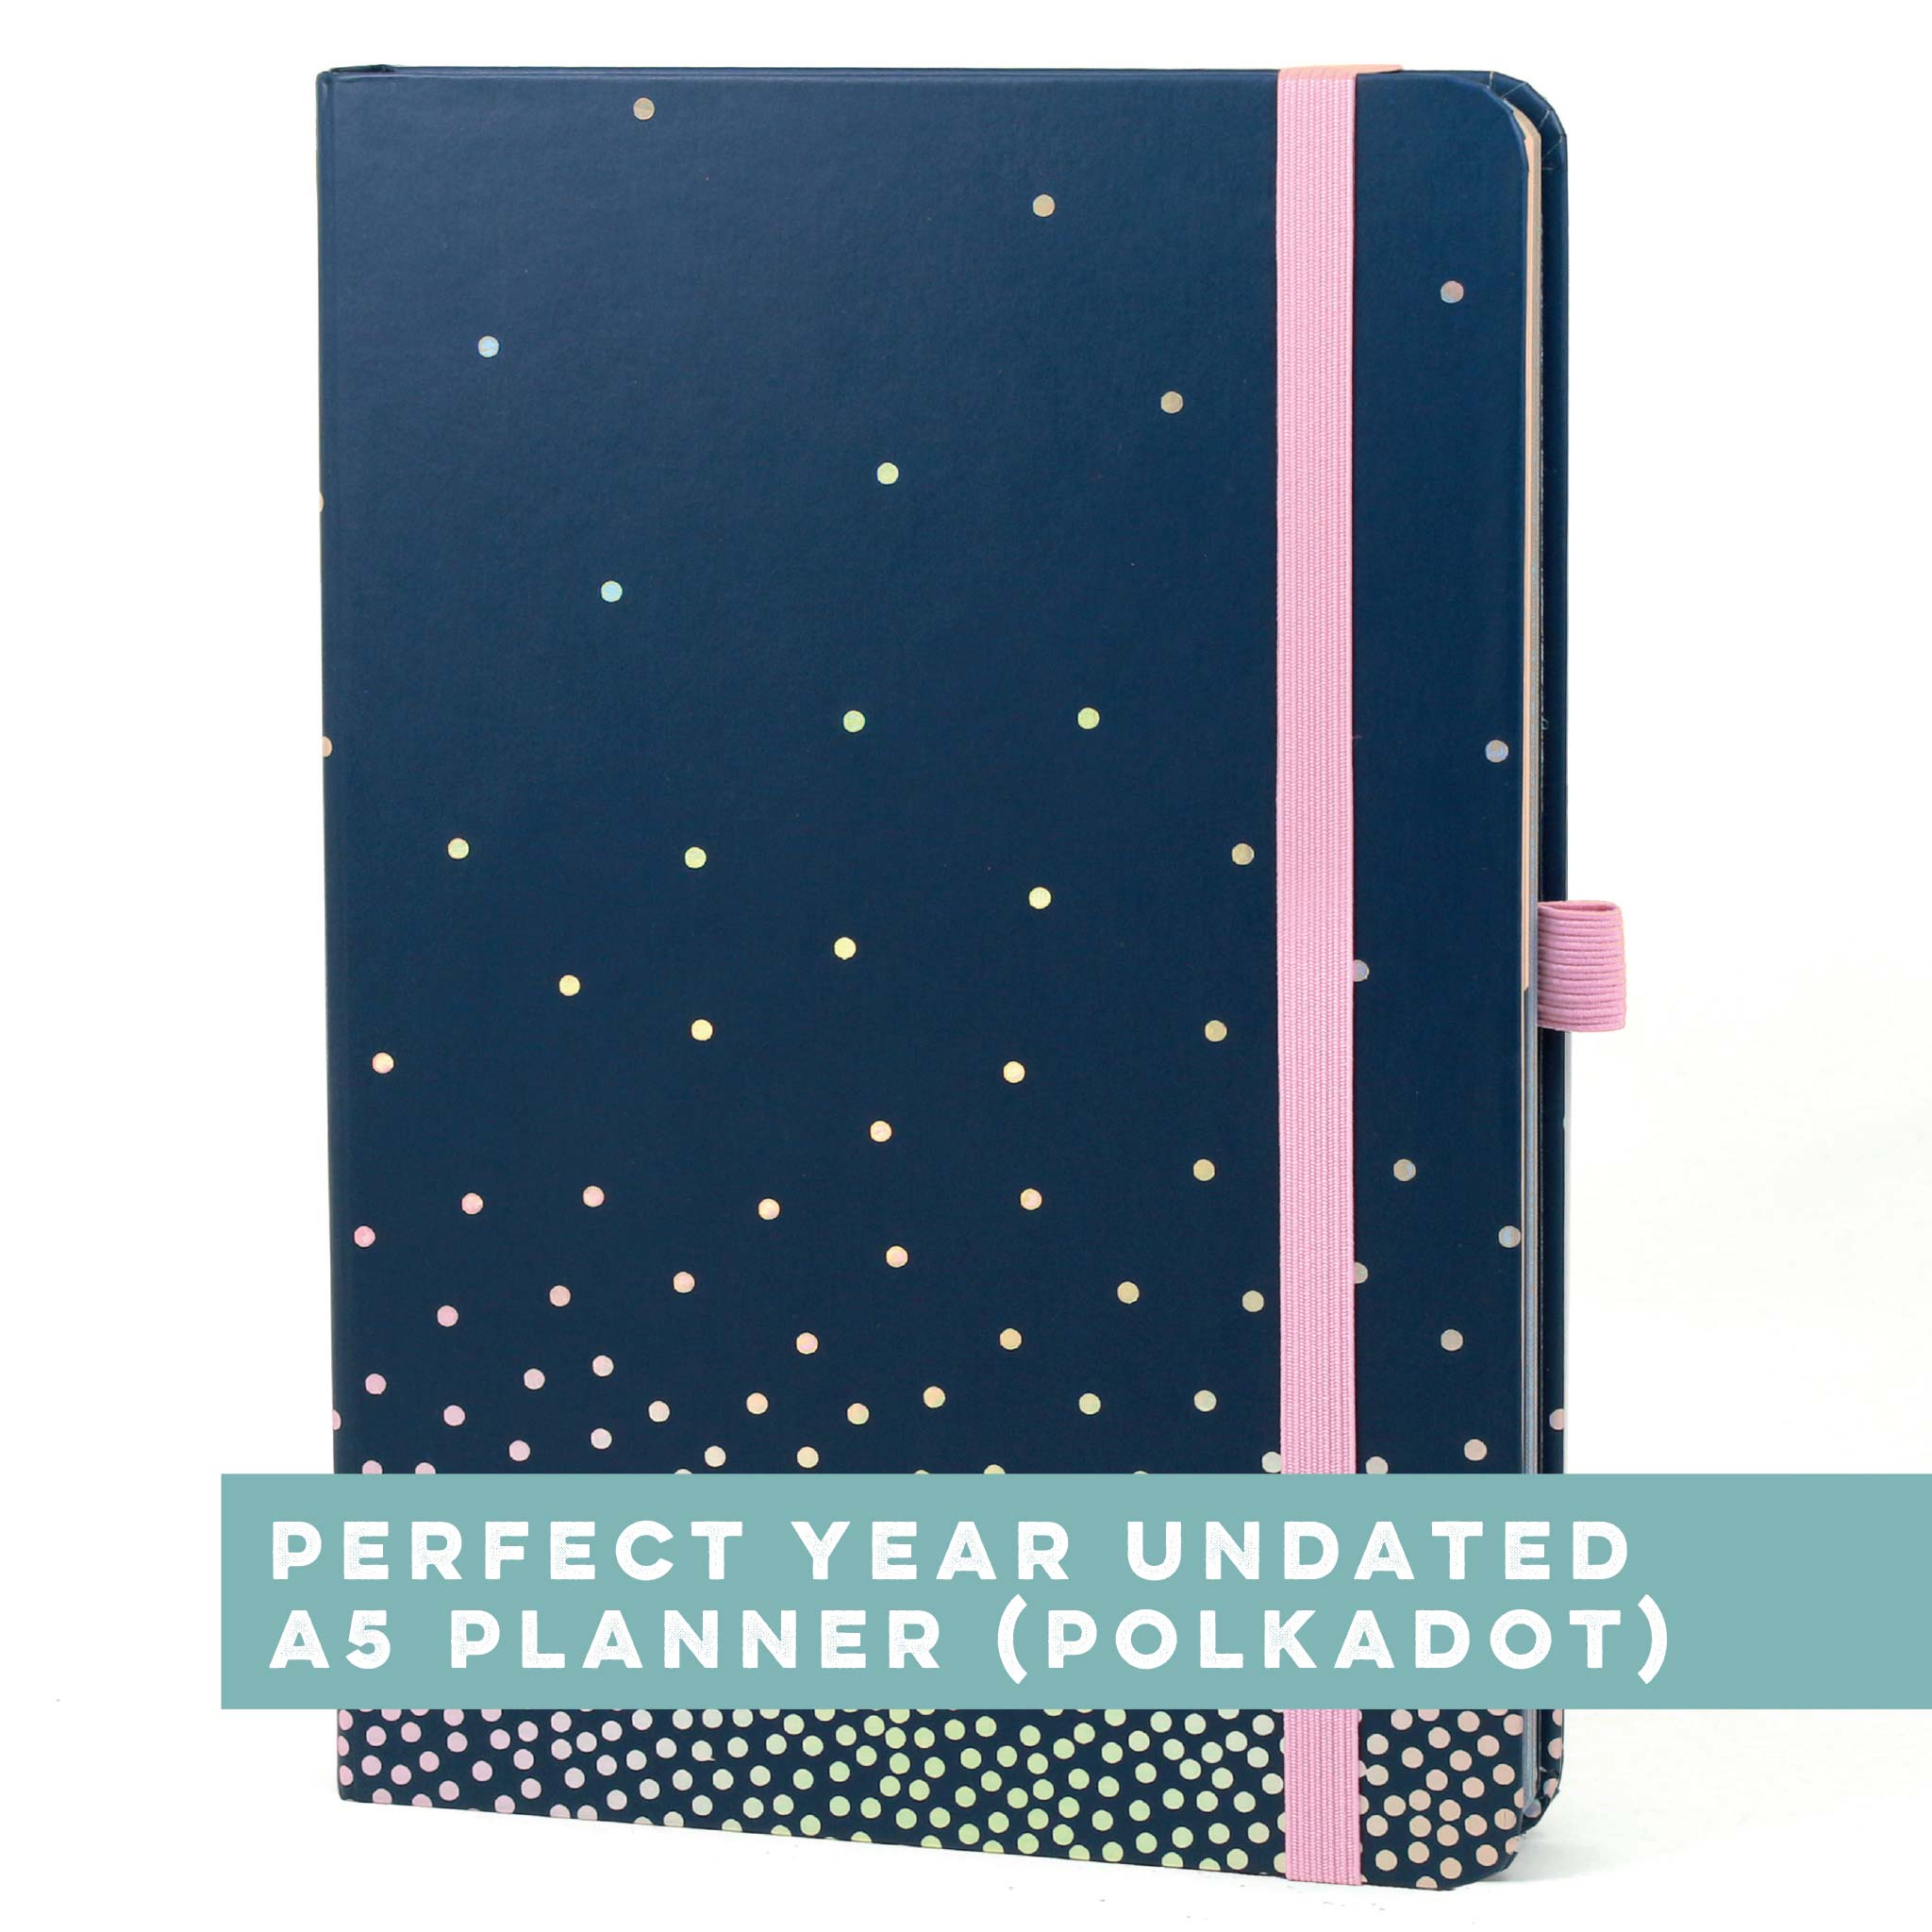 An image of Perfect Year Undated A5 Planner (Polkadot) I Boxclever Press